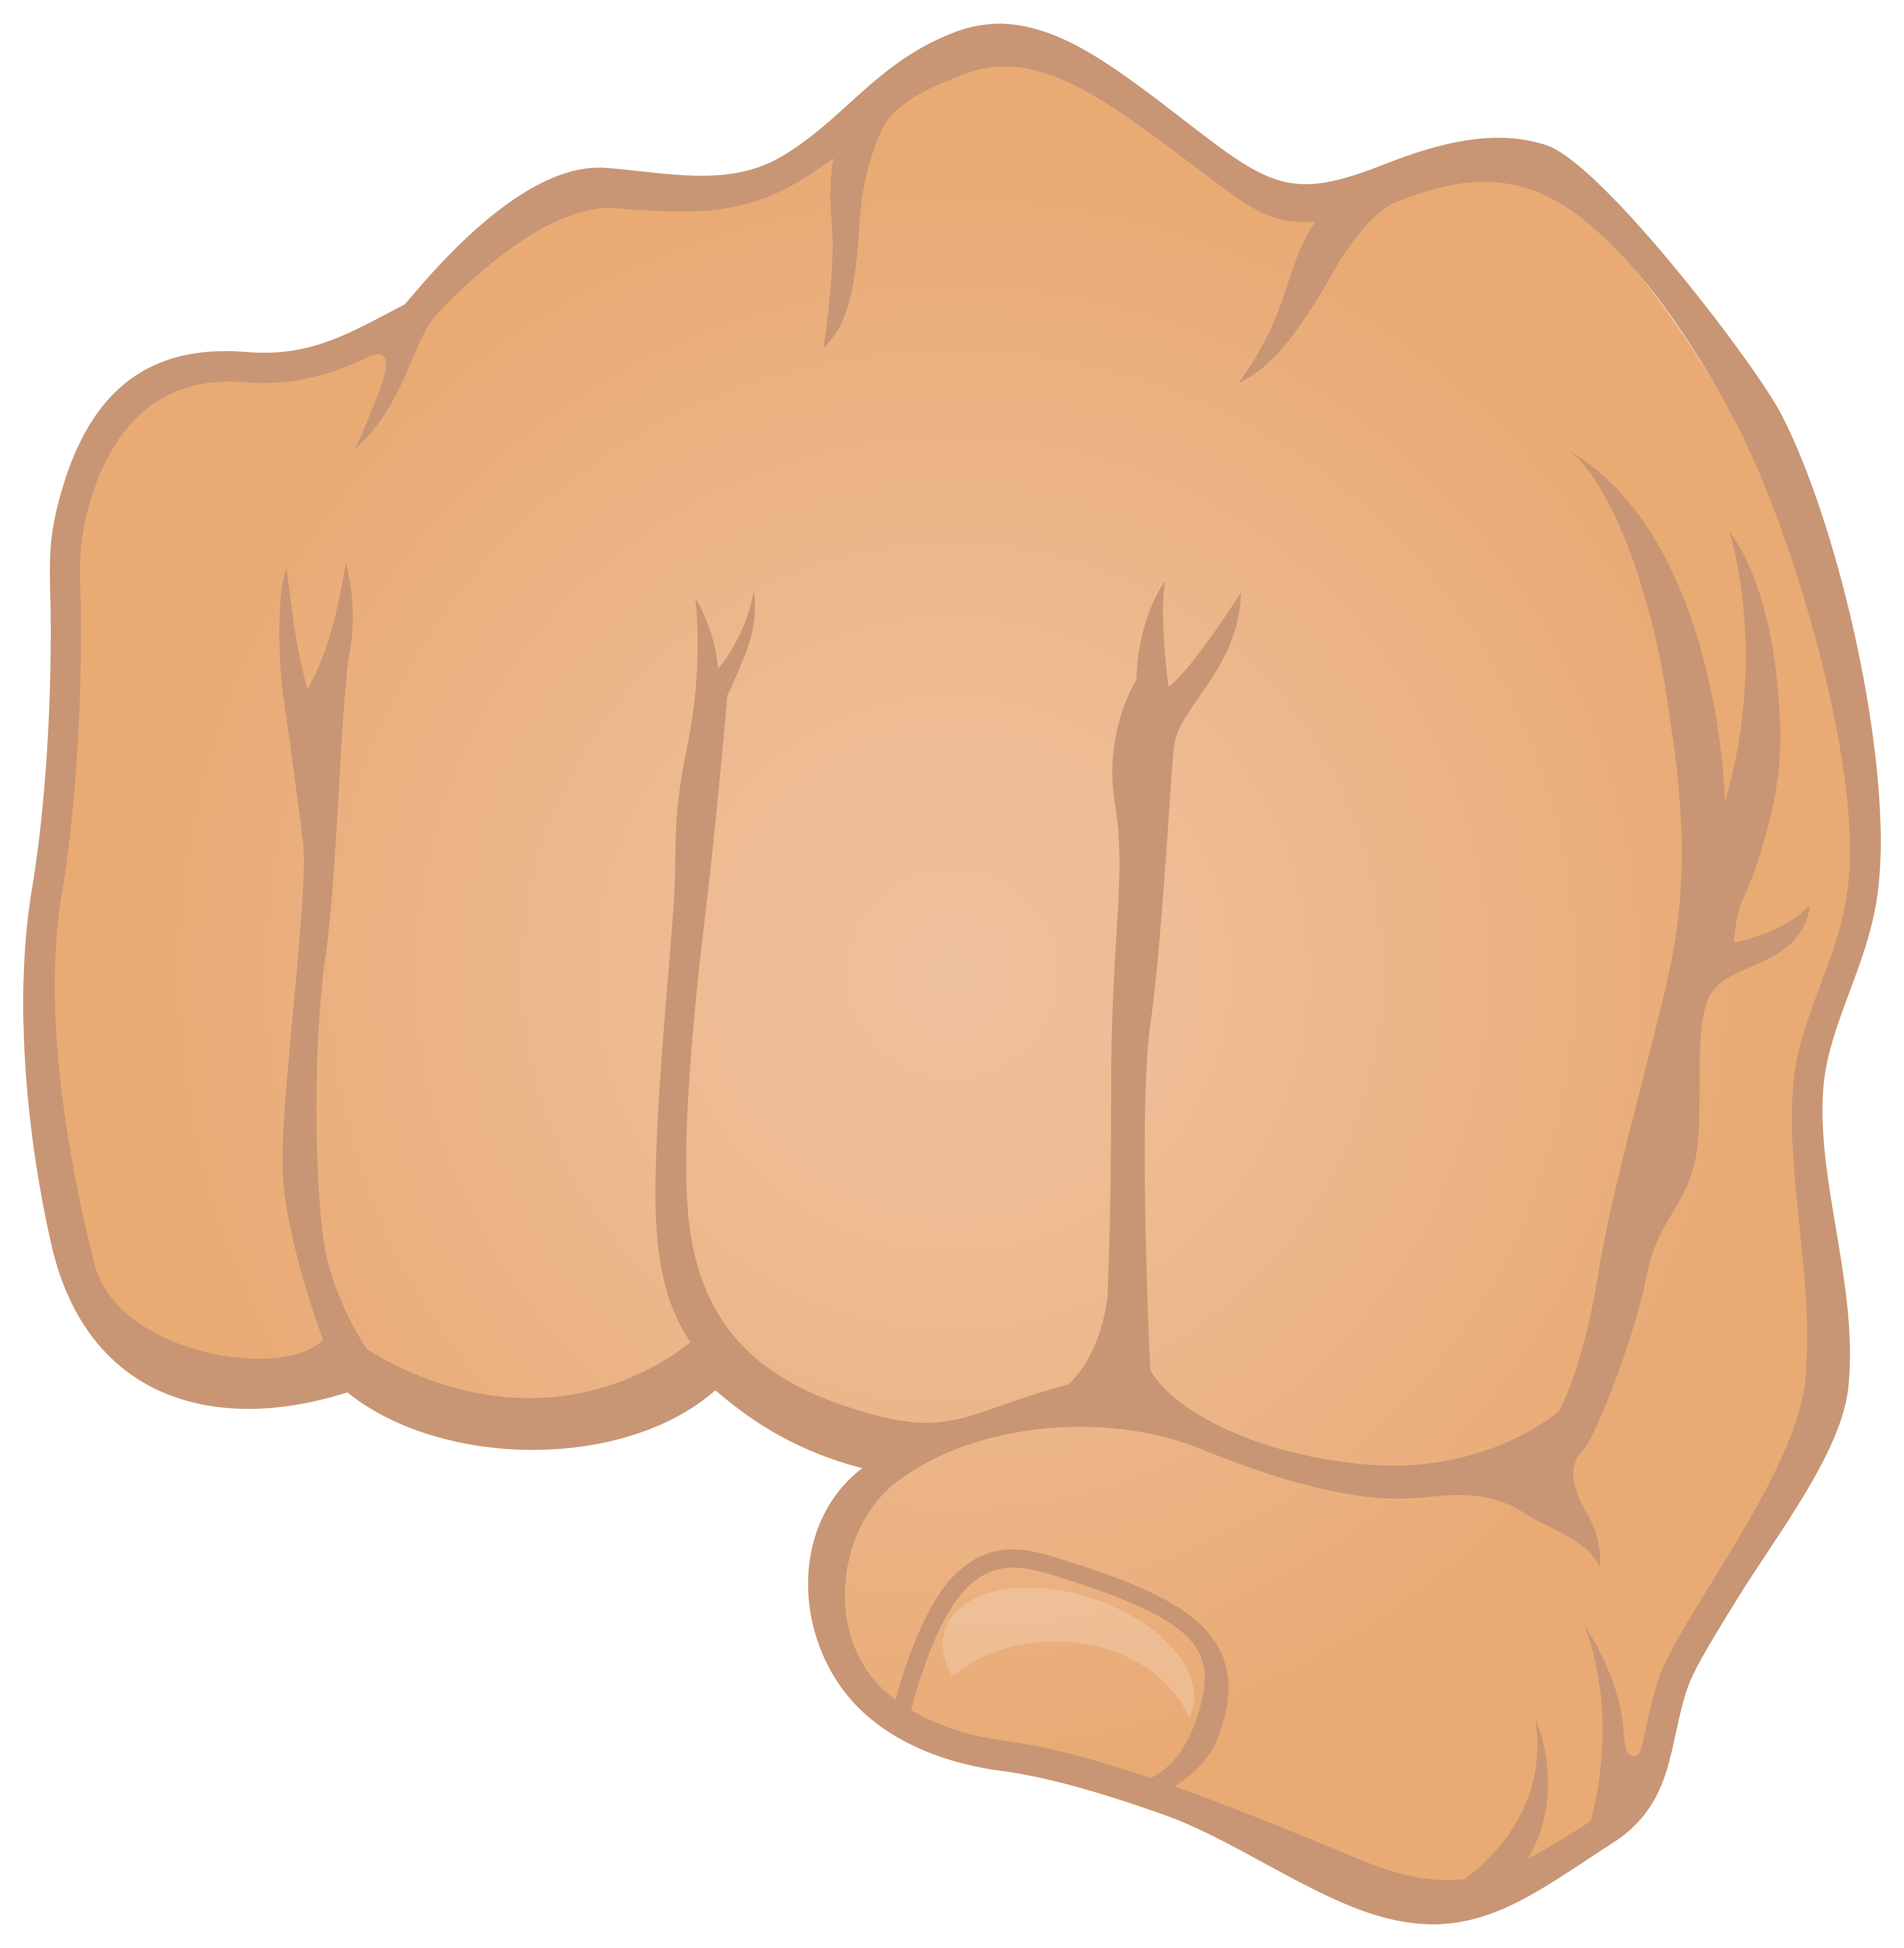 Fist Clipart Fist Punching Picture 1109635 Fist Clipart Fist Punching